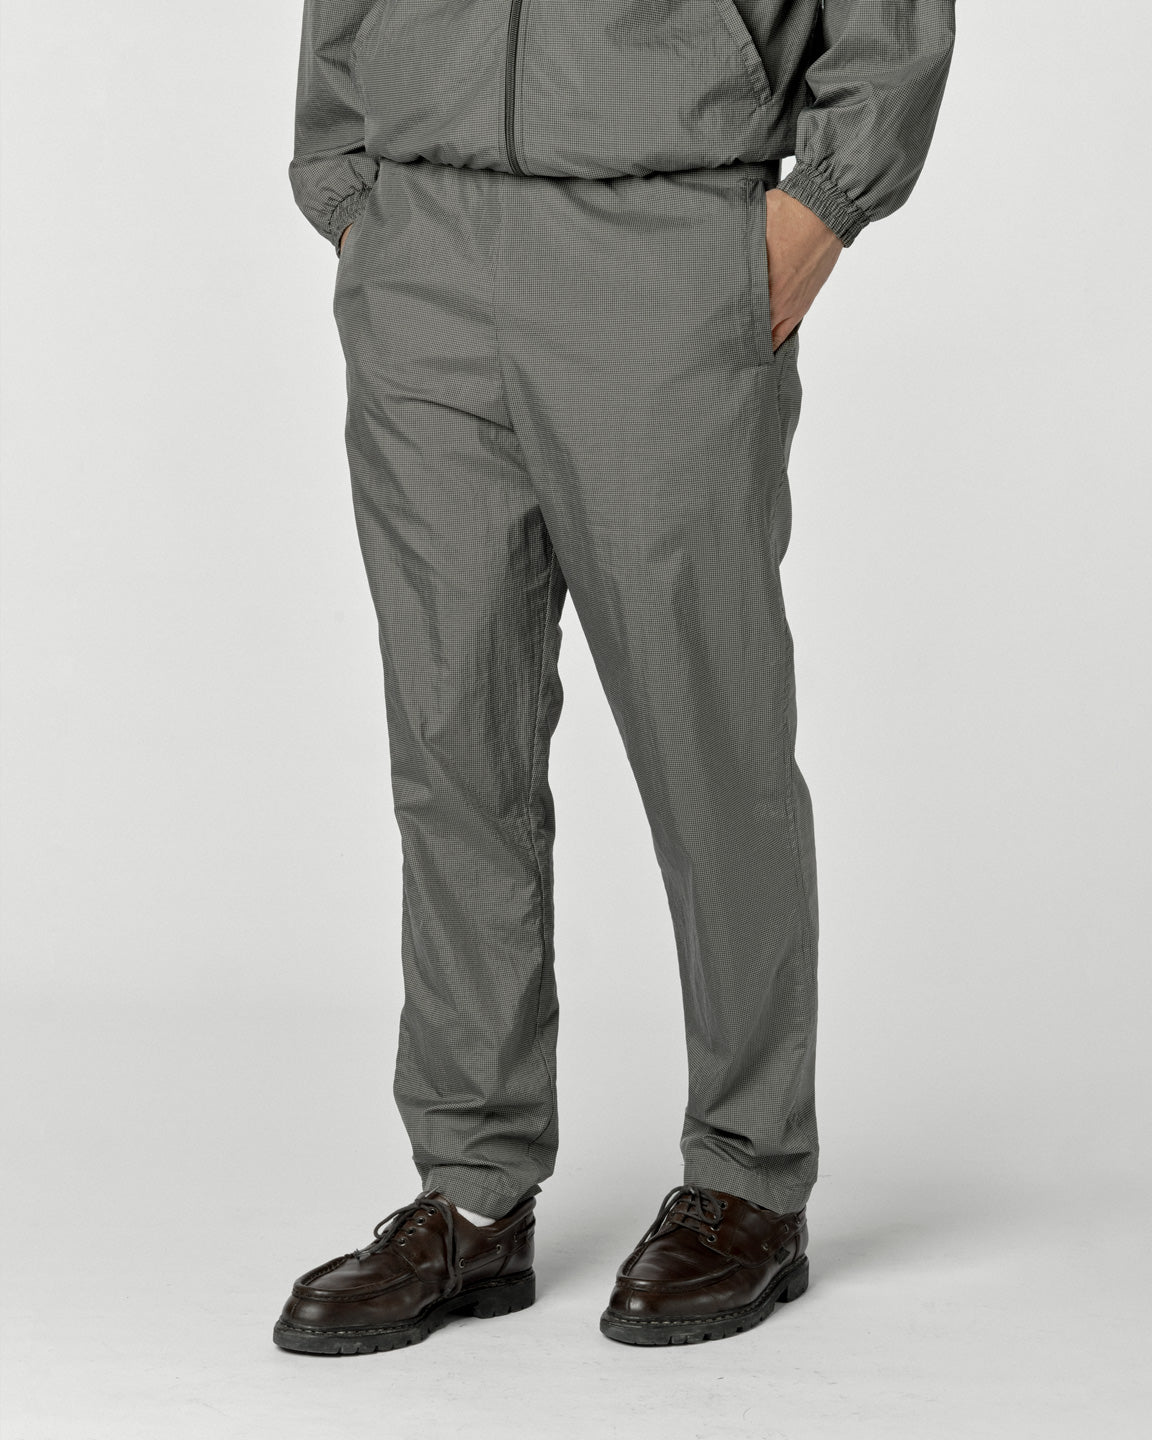 CPS.03_Trousers_Men